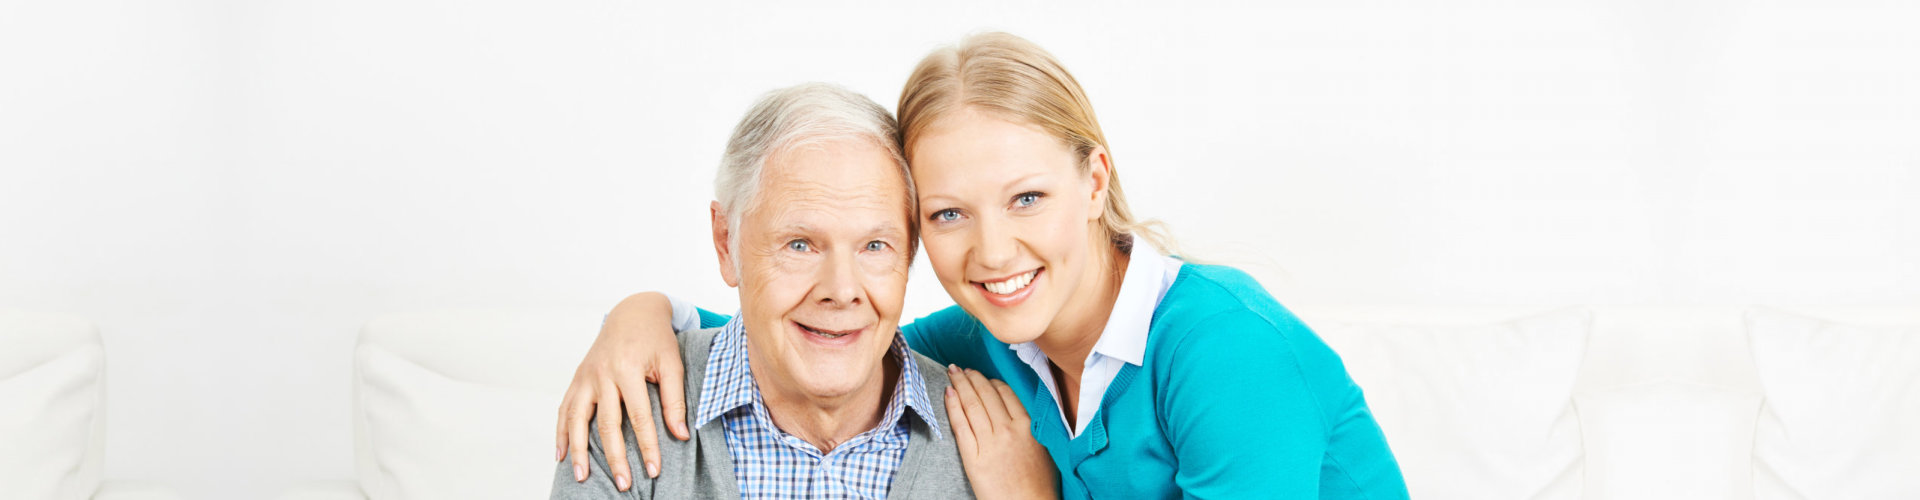 elderly man and woman smiling